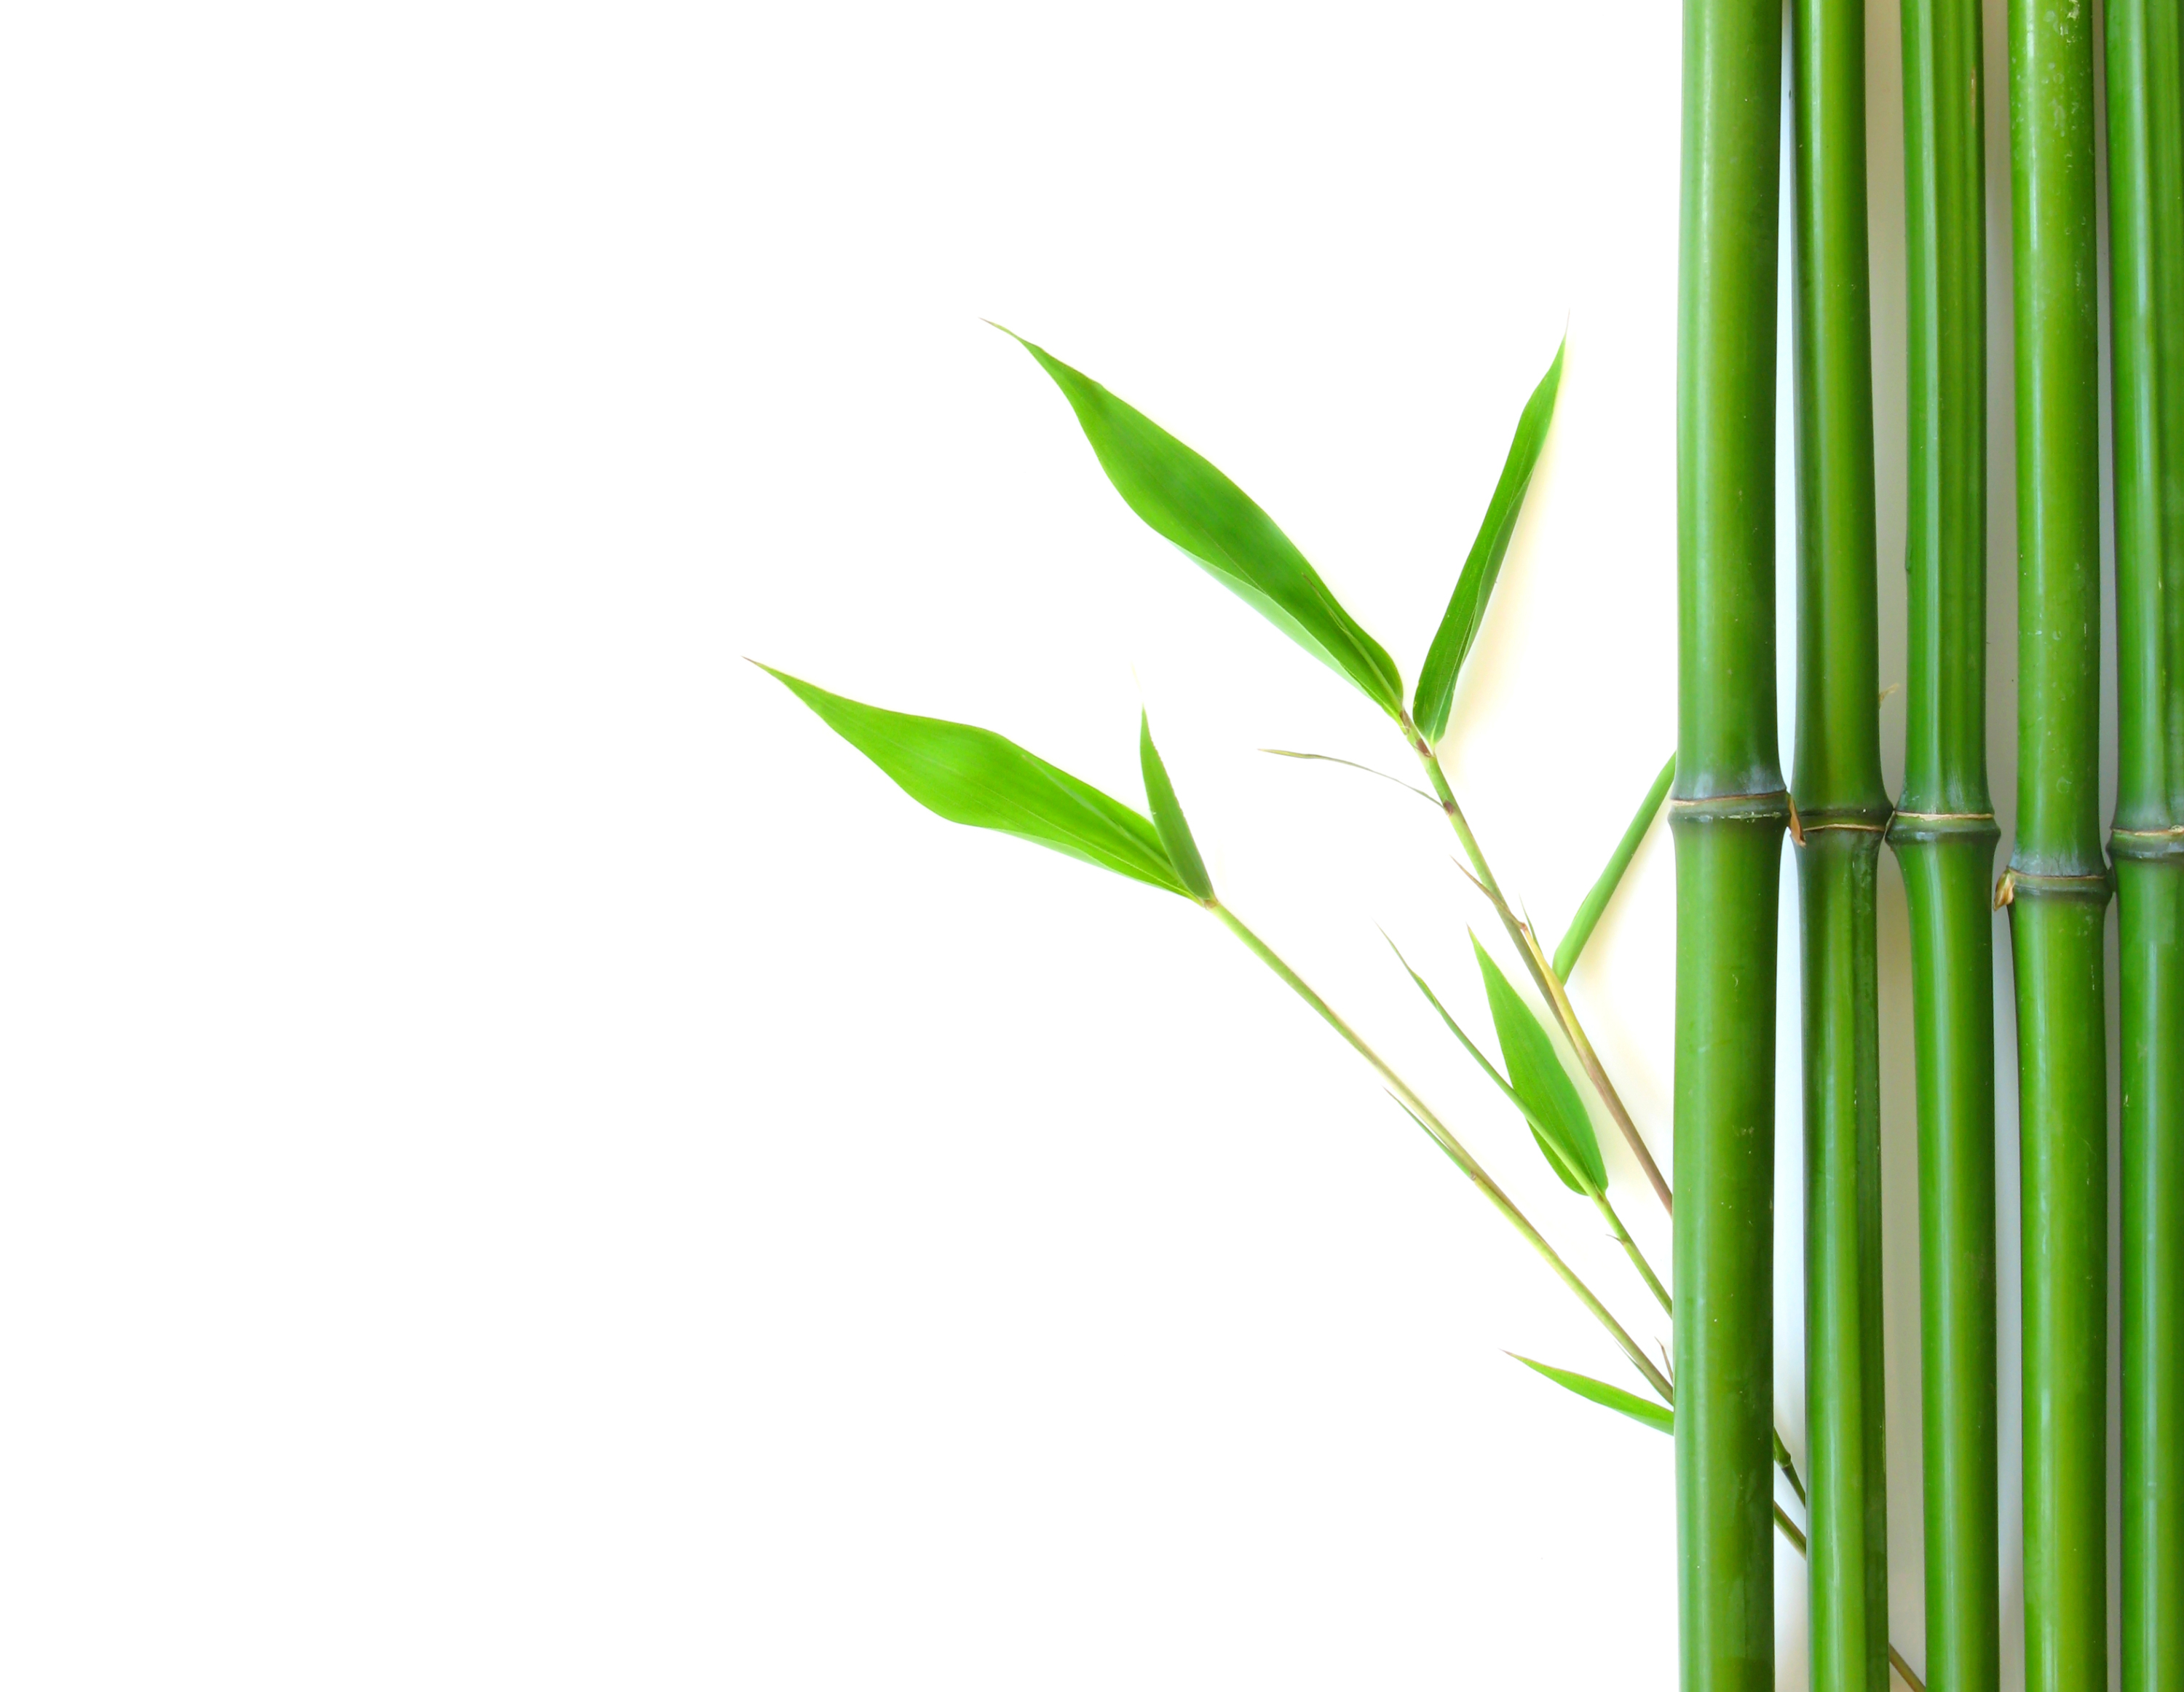 Bamboo clipart no background